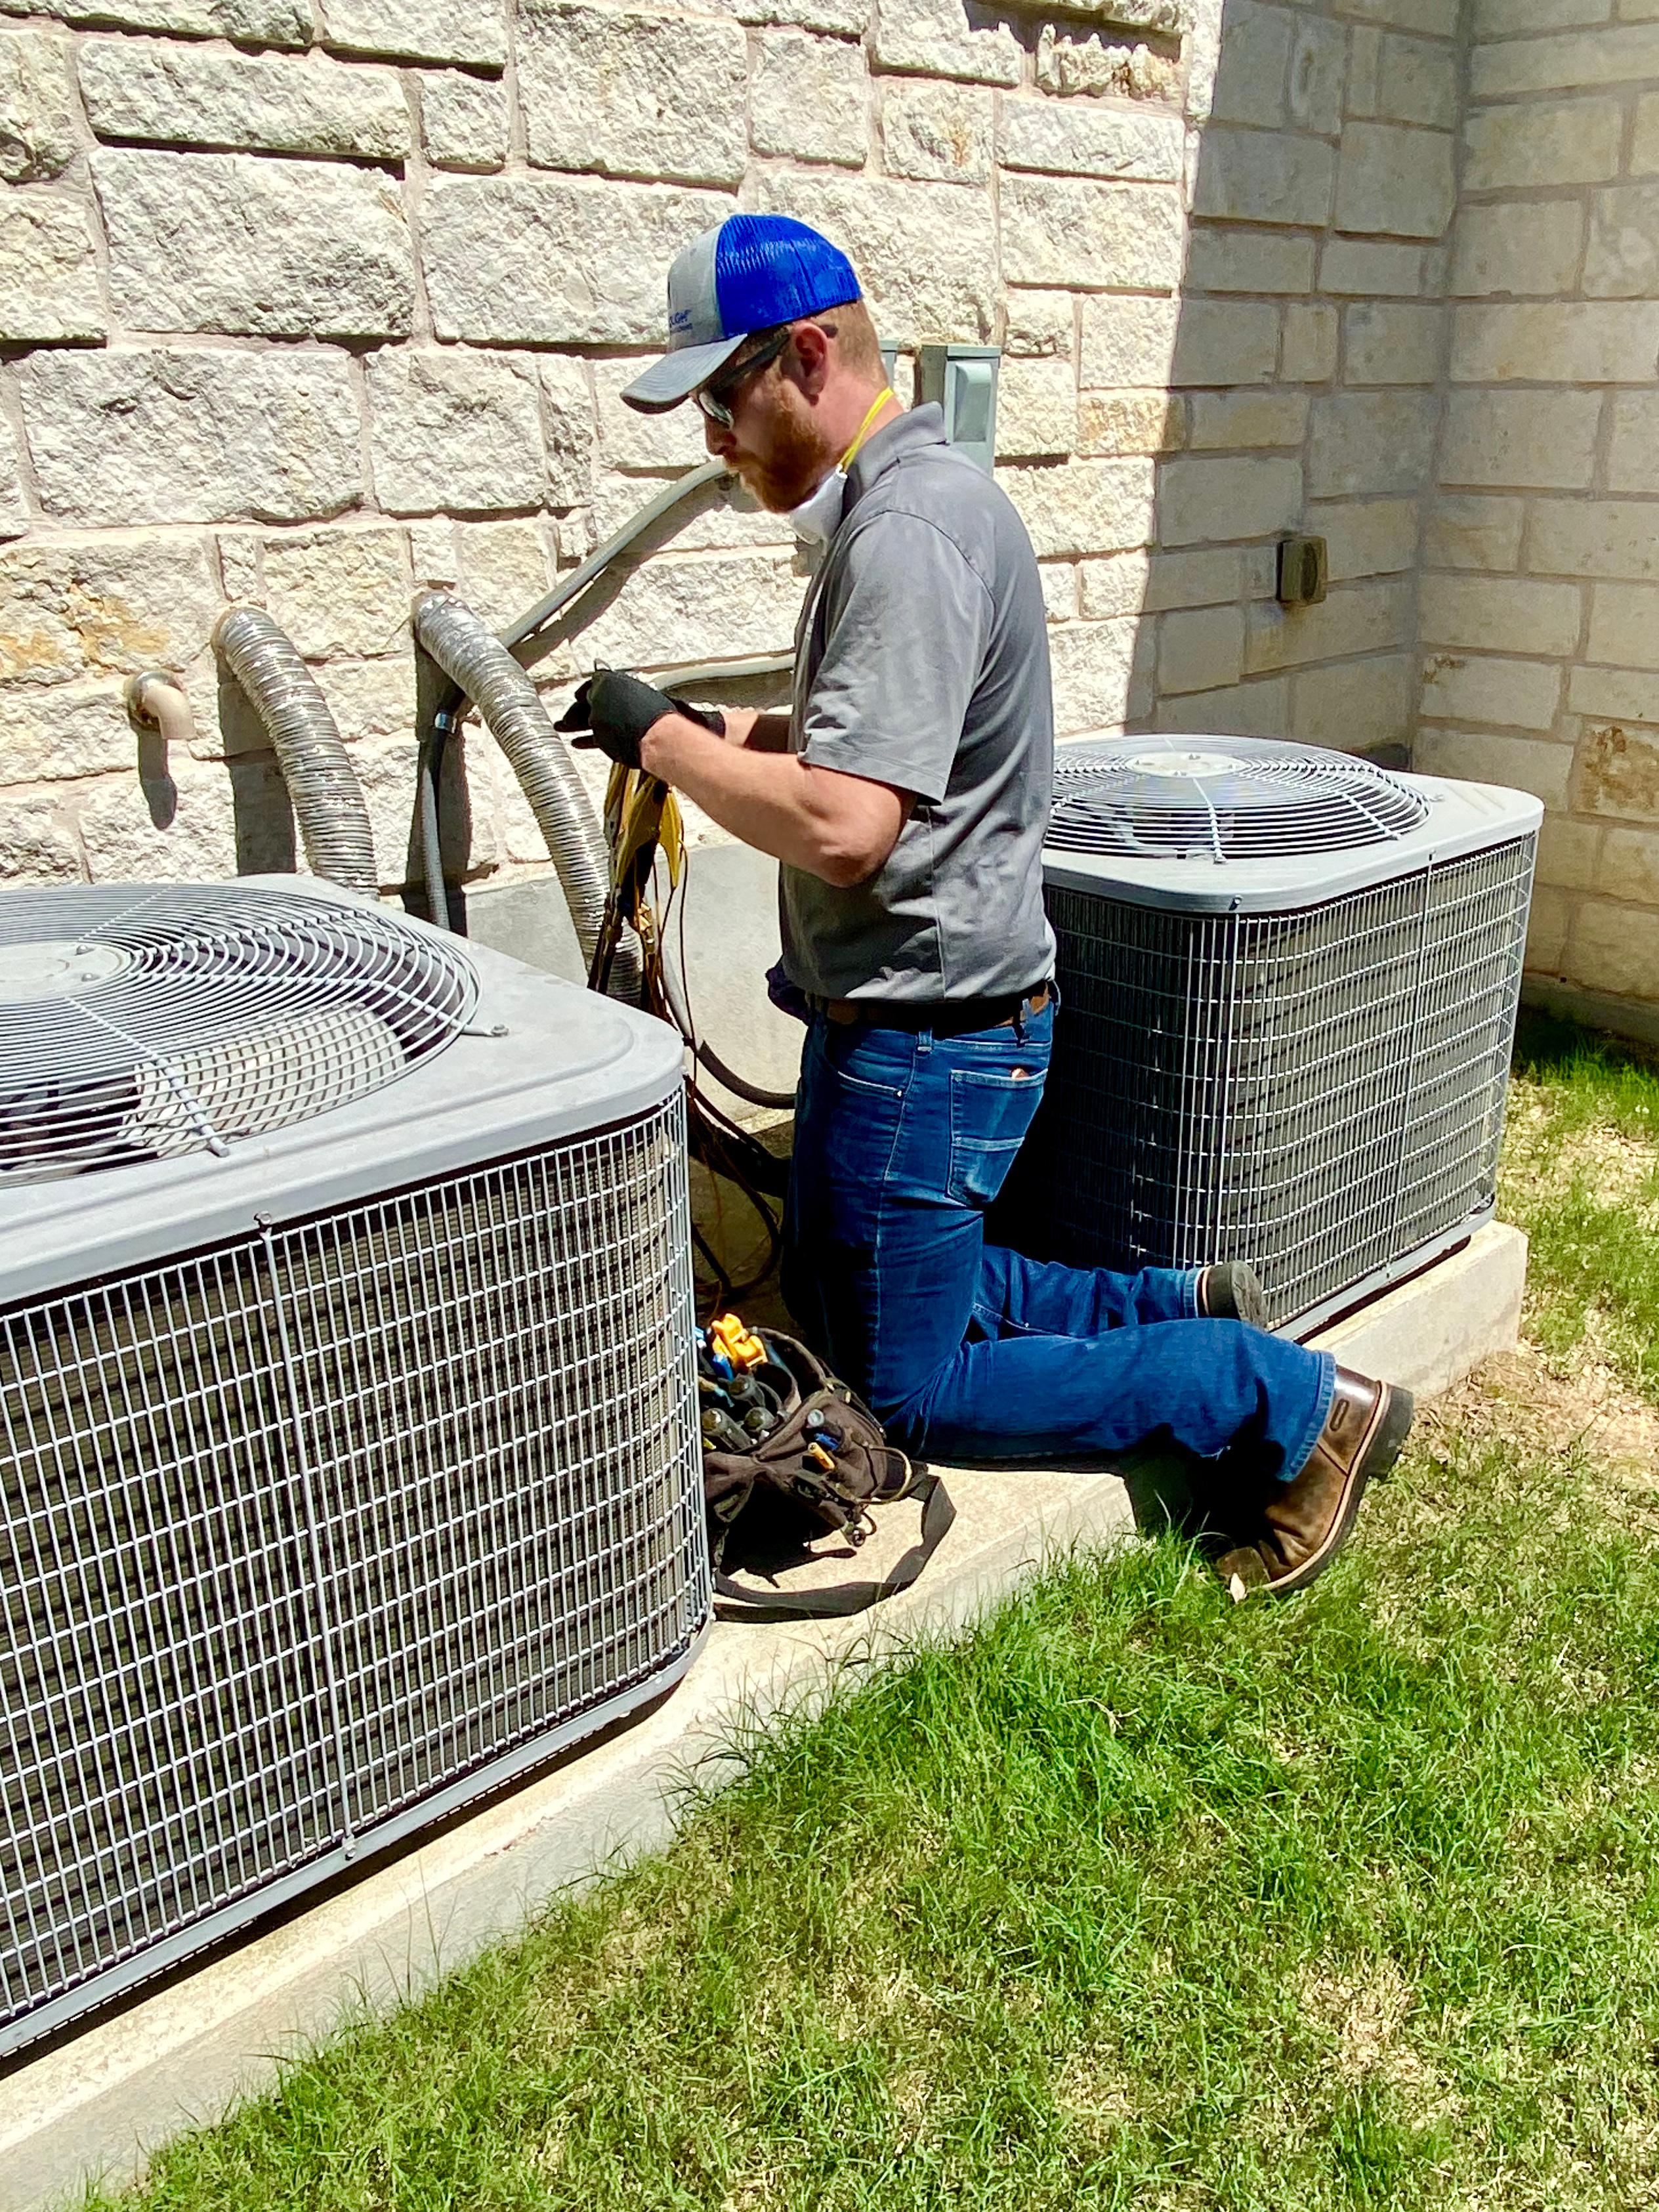 McCullough Heating and Air Conditioning Photo